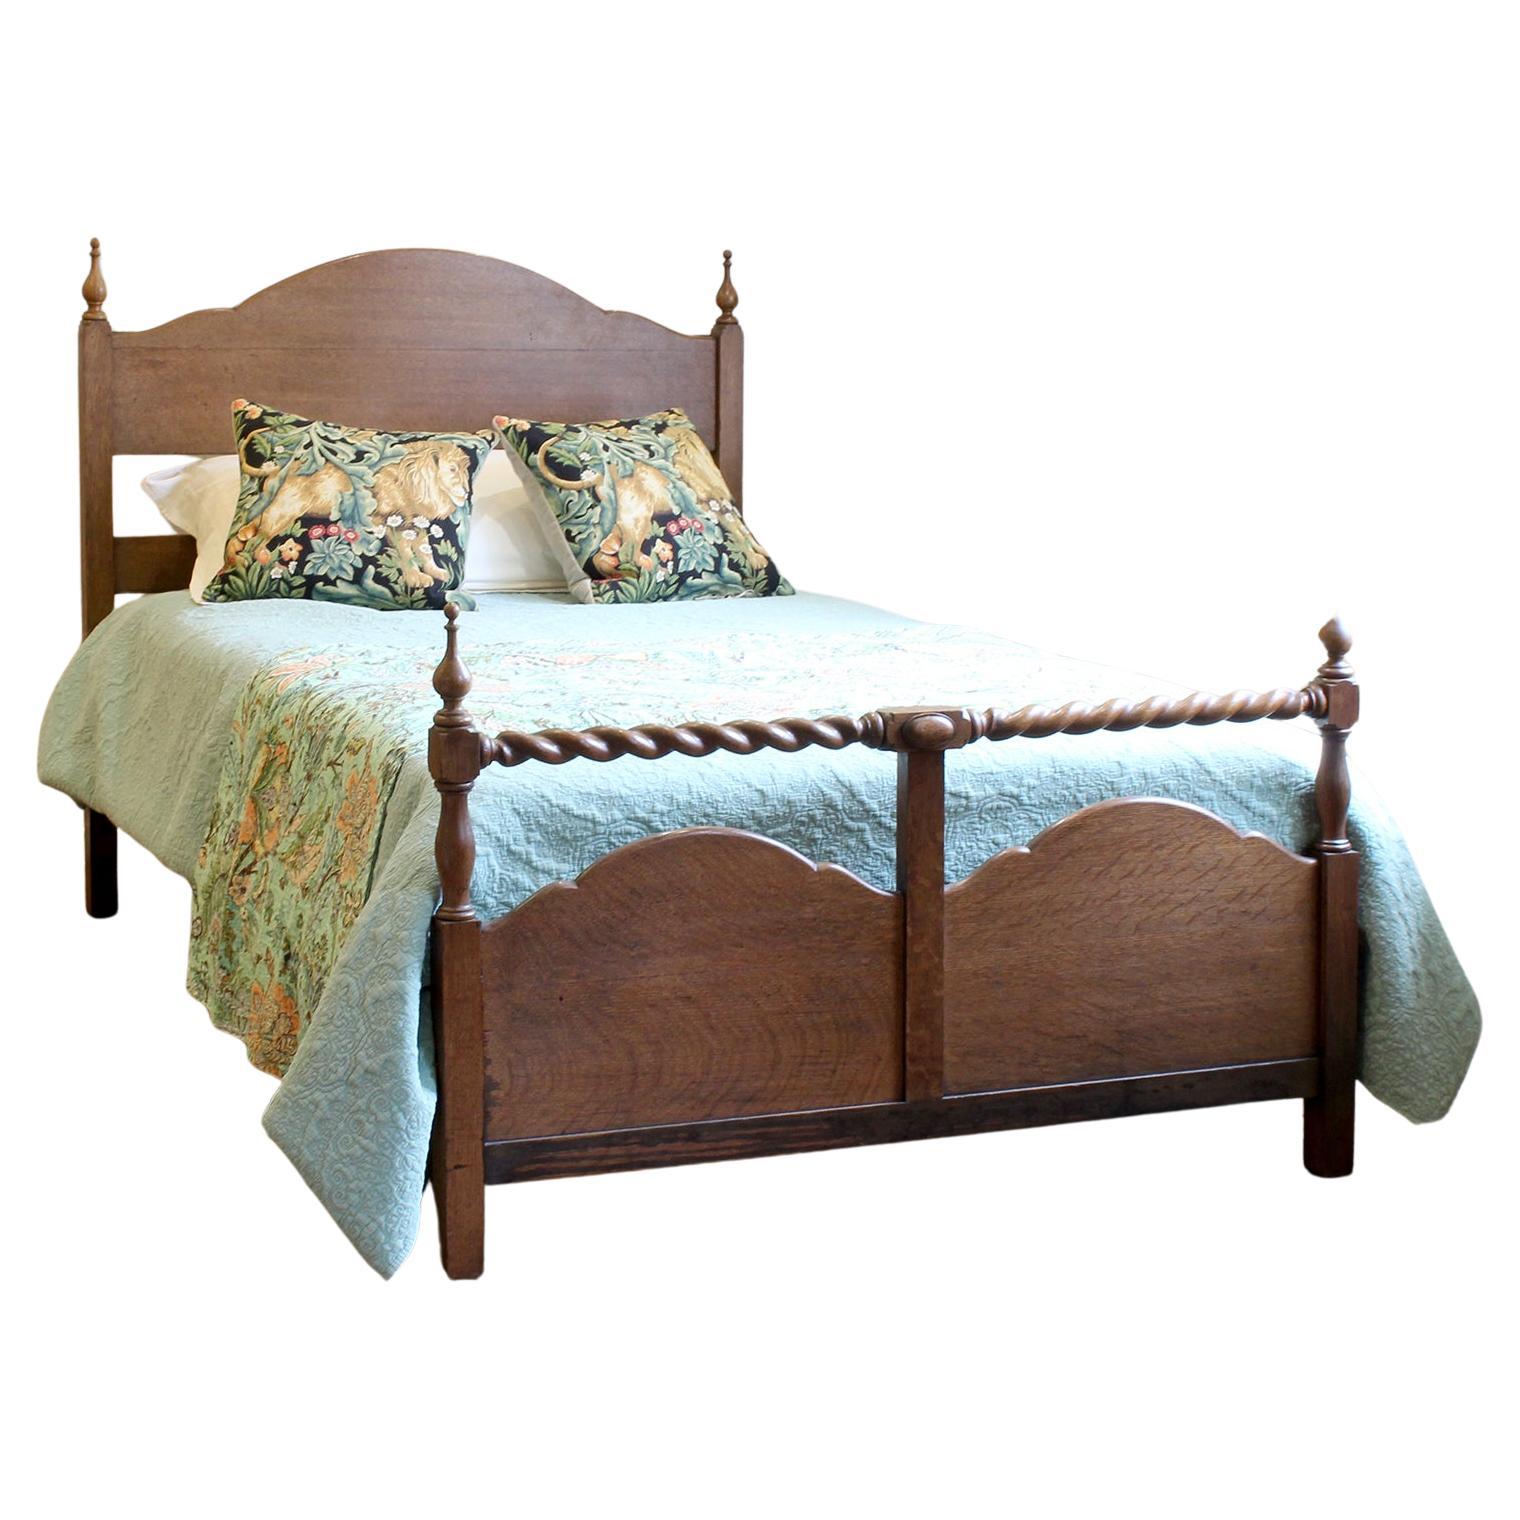 Small Double Oak Antique Bed - WD57 For Sale